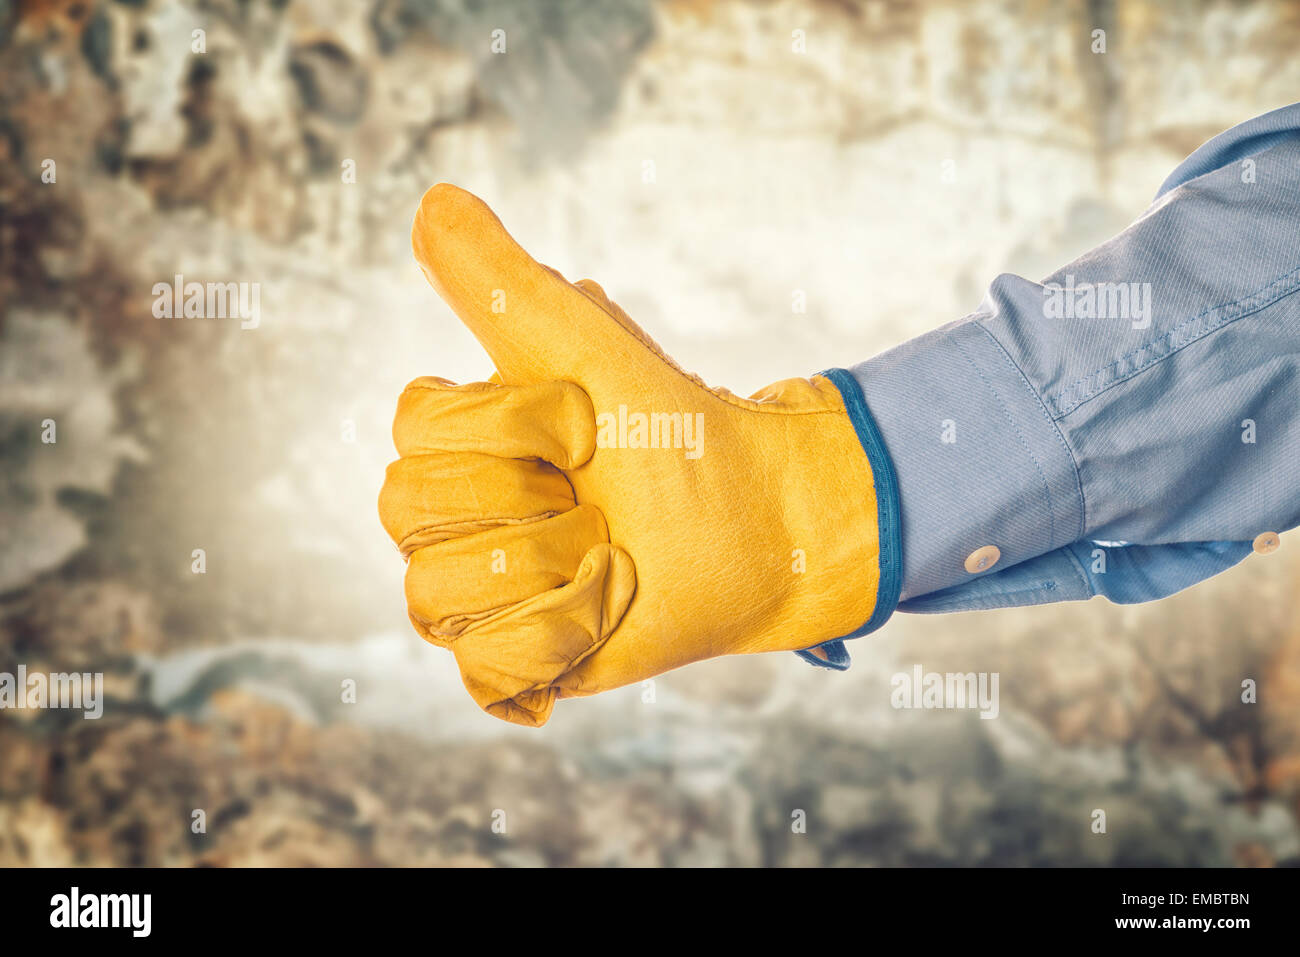 Construction Engineer Wearing Yellow Leather Protective Gloves Gesturing Thumbs Up for Approval Stock Photo